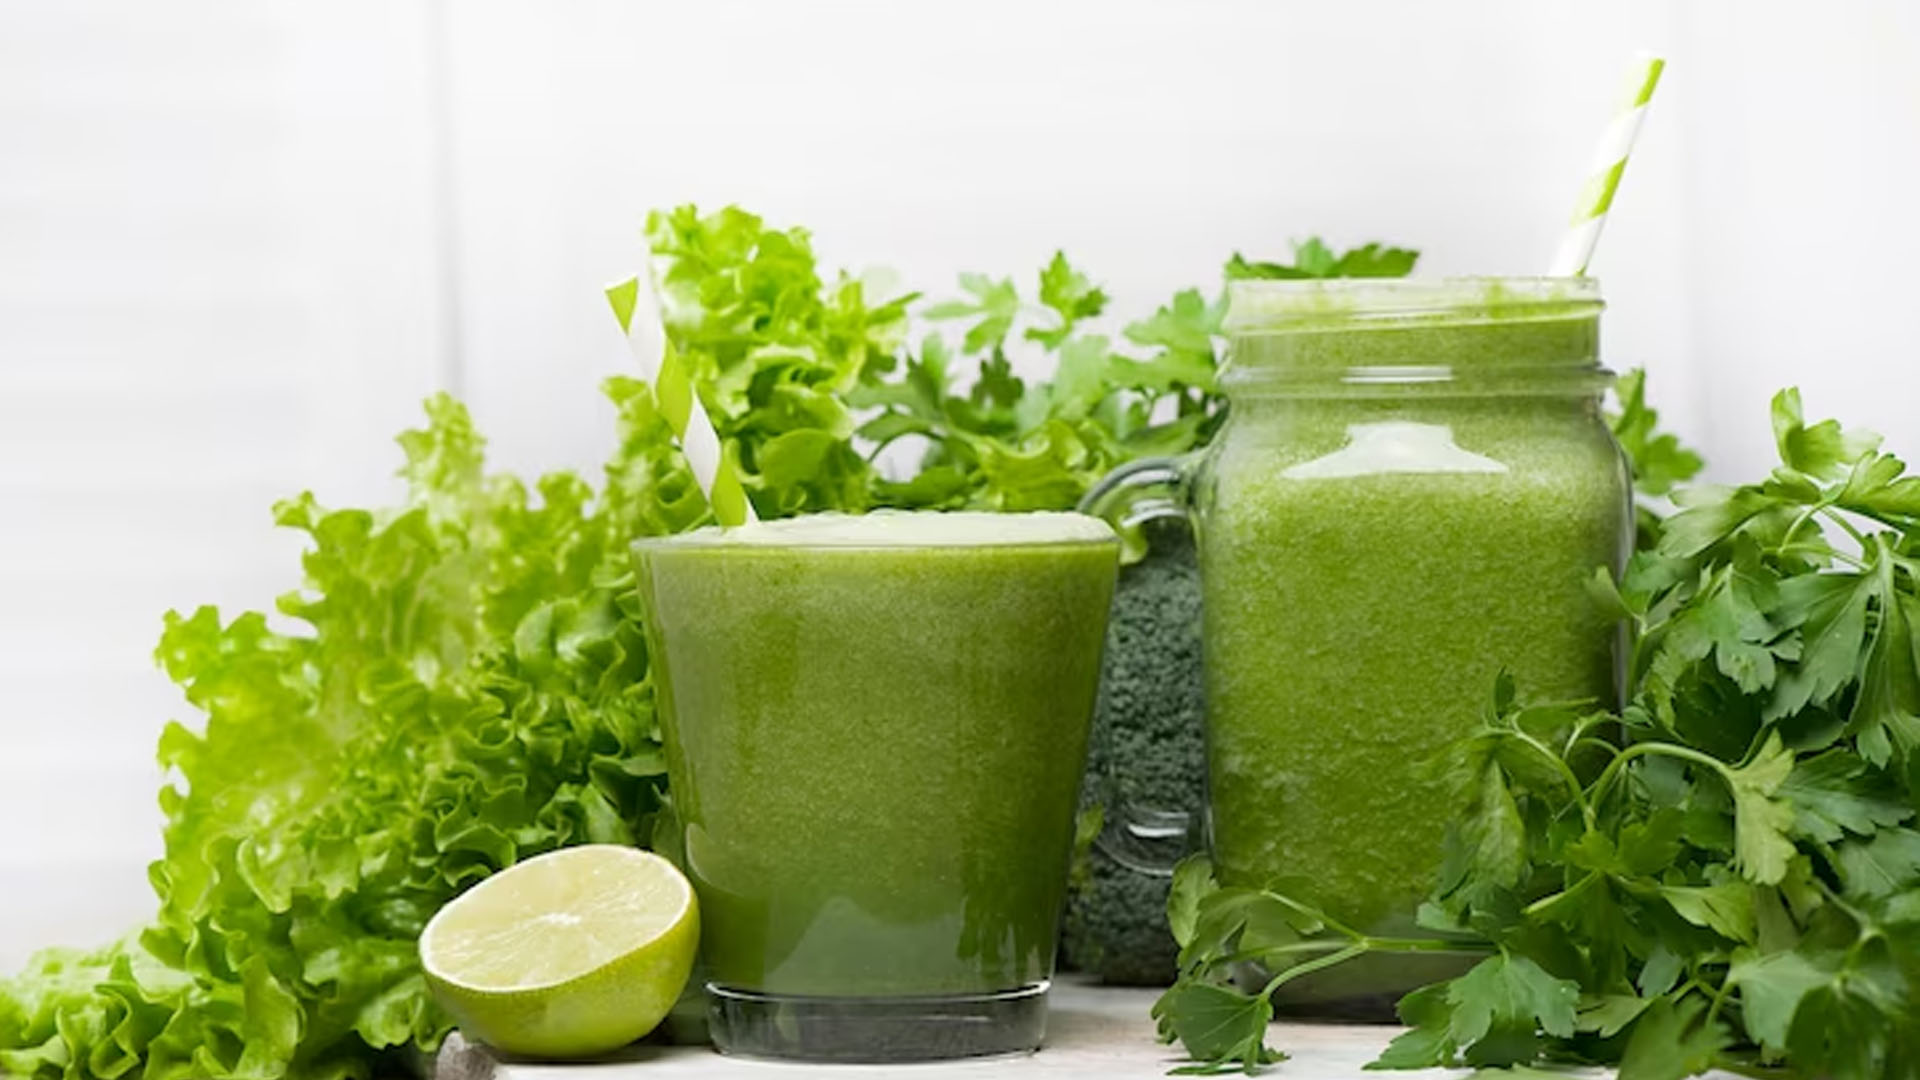 What Are The Health Benefits of Drinking Green Smoothies?